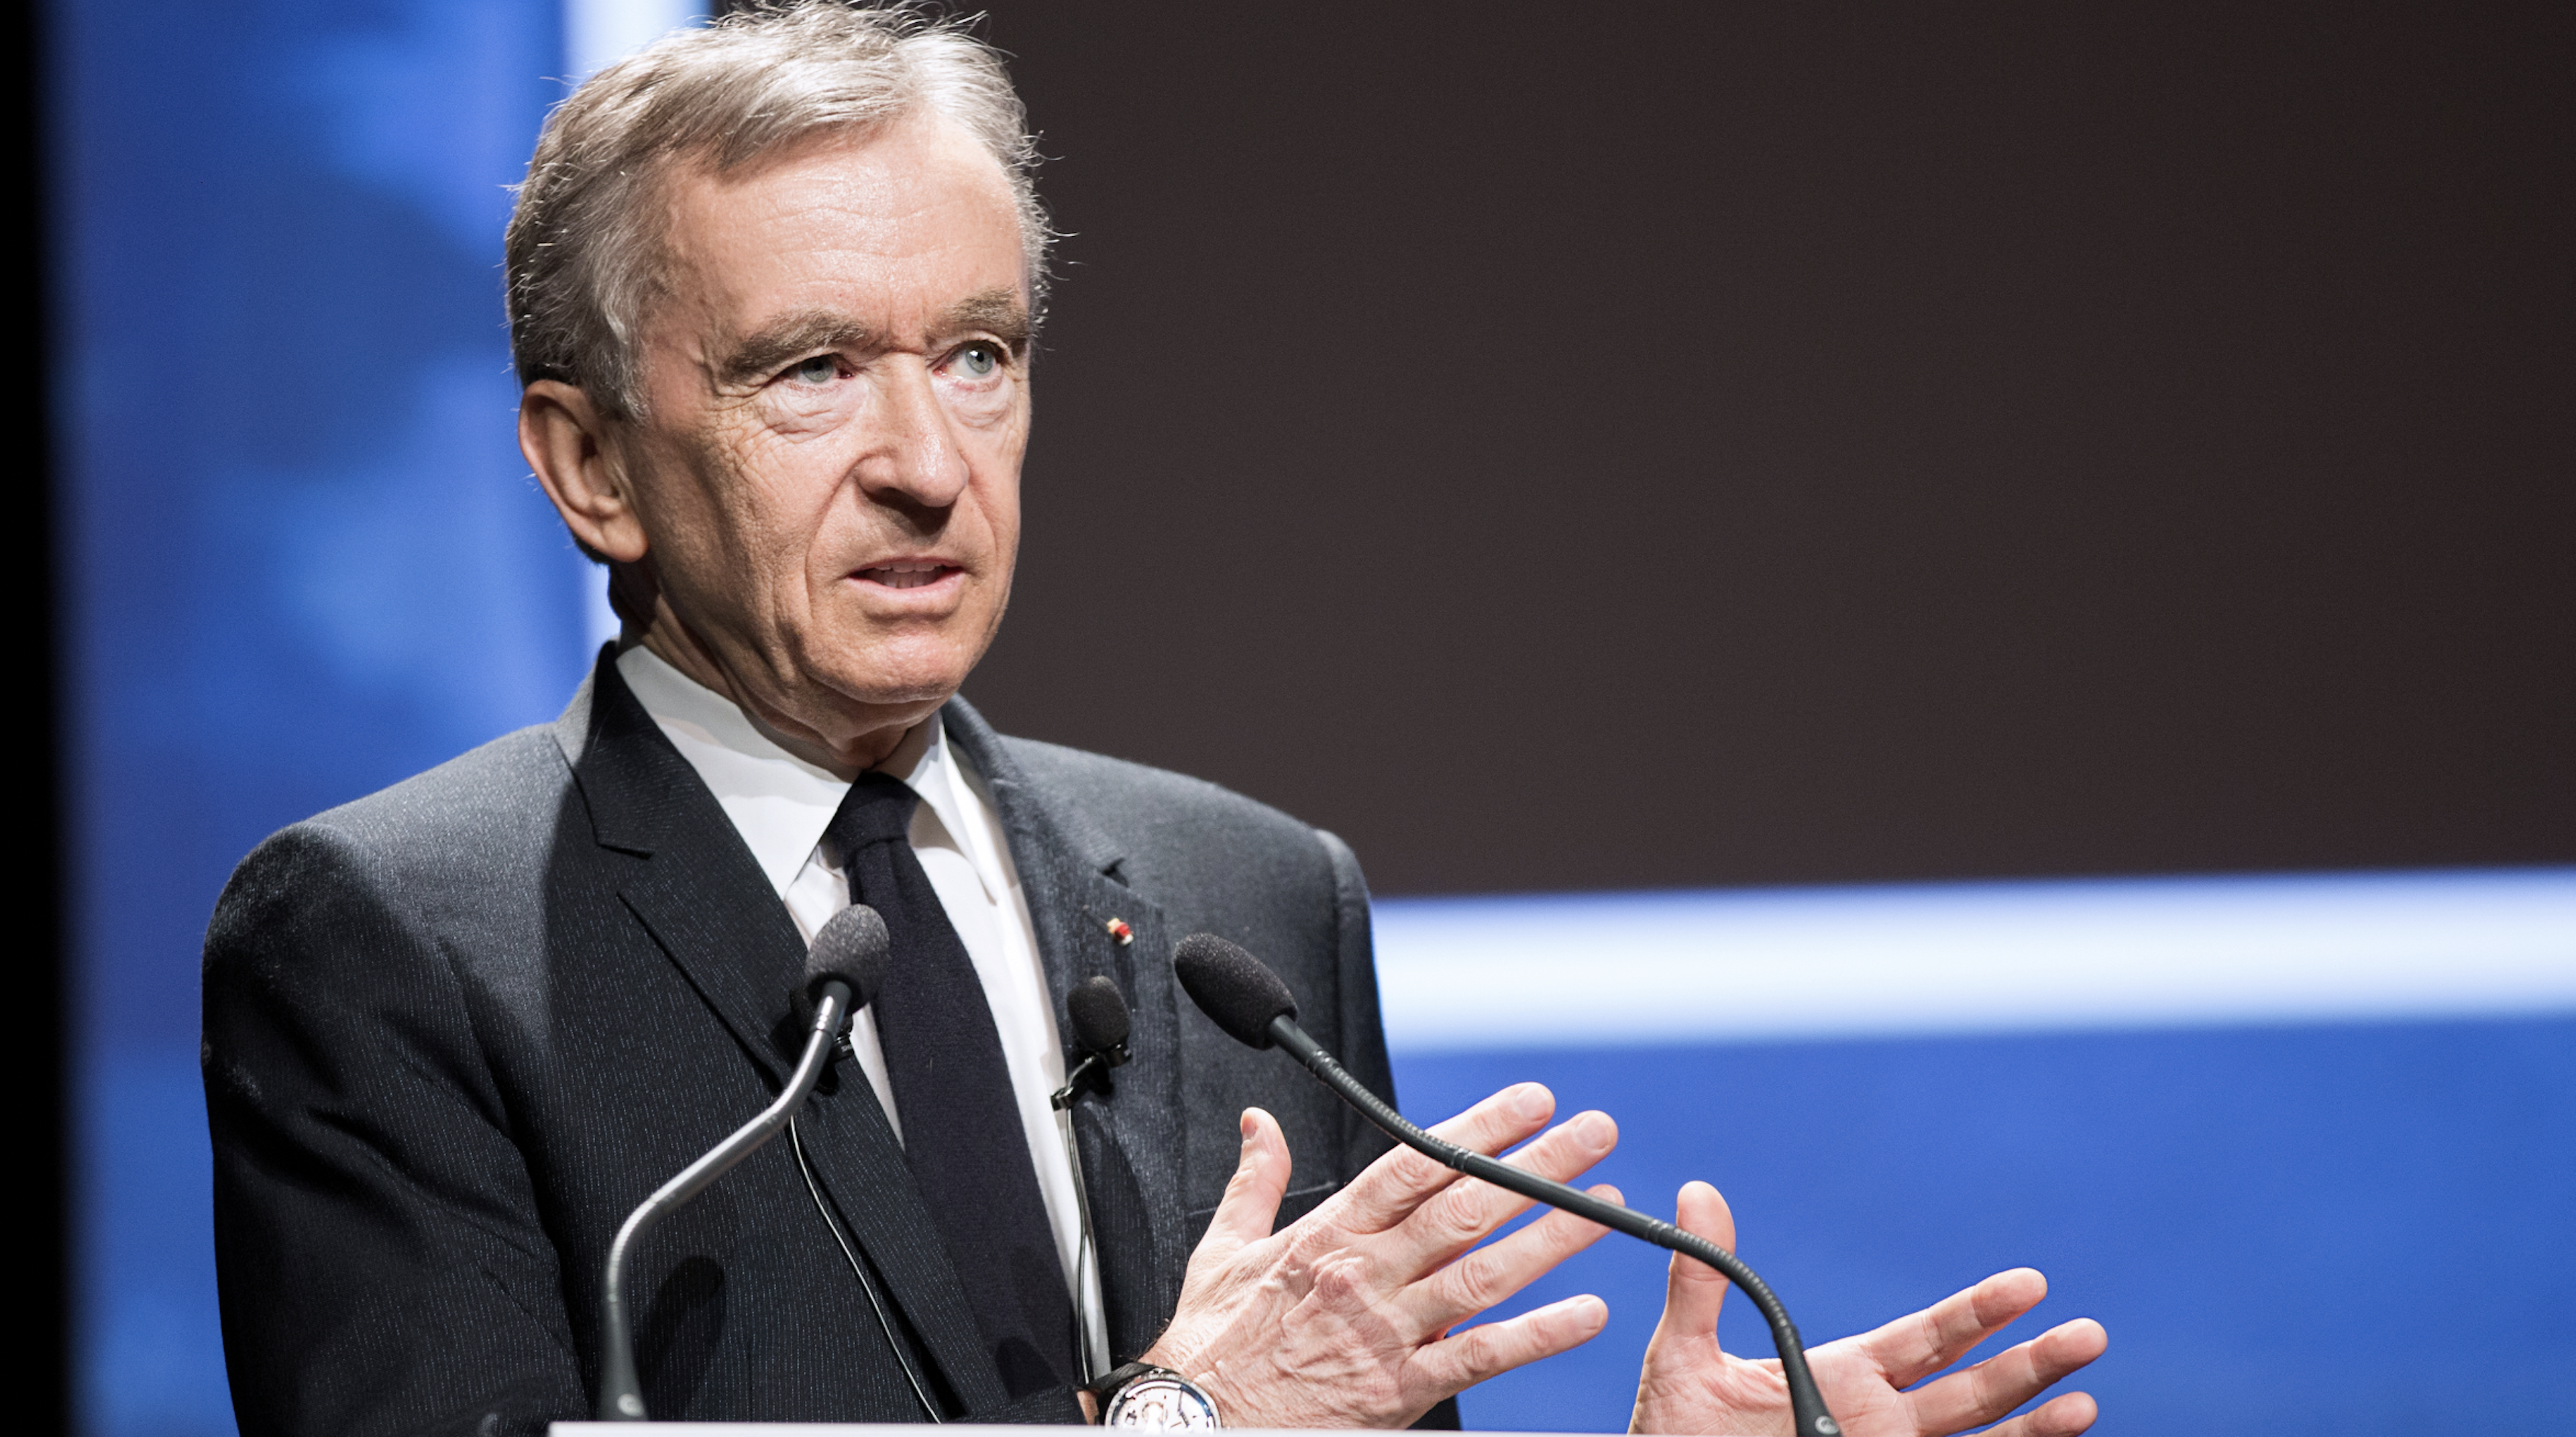 Bernard Arnault has become the richest person in the world